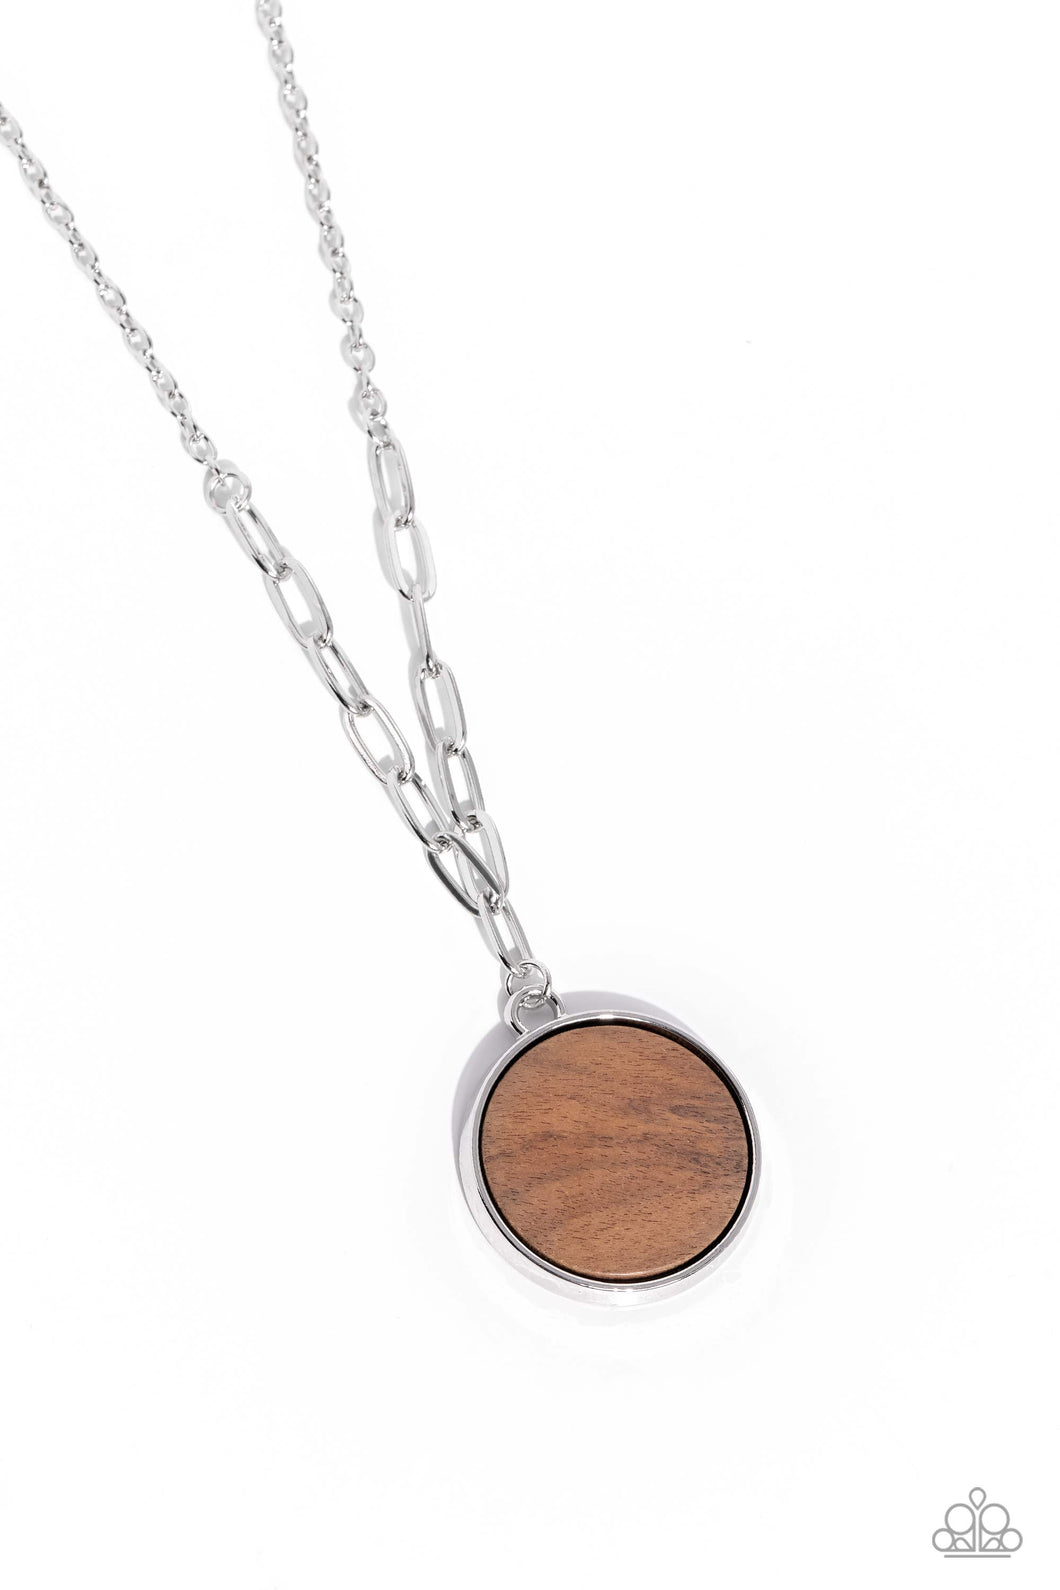 WOODn't Dream of It - Brown (Wood) Necklace